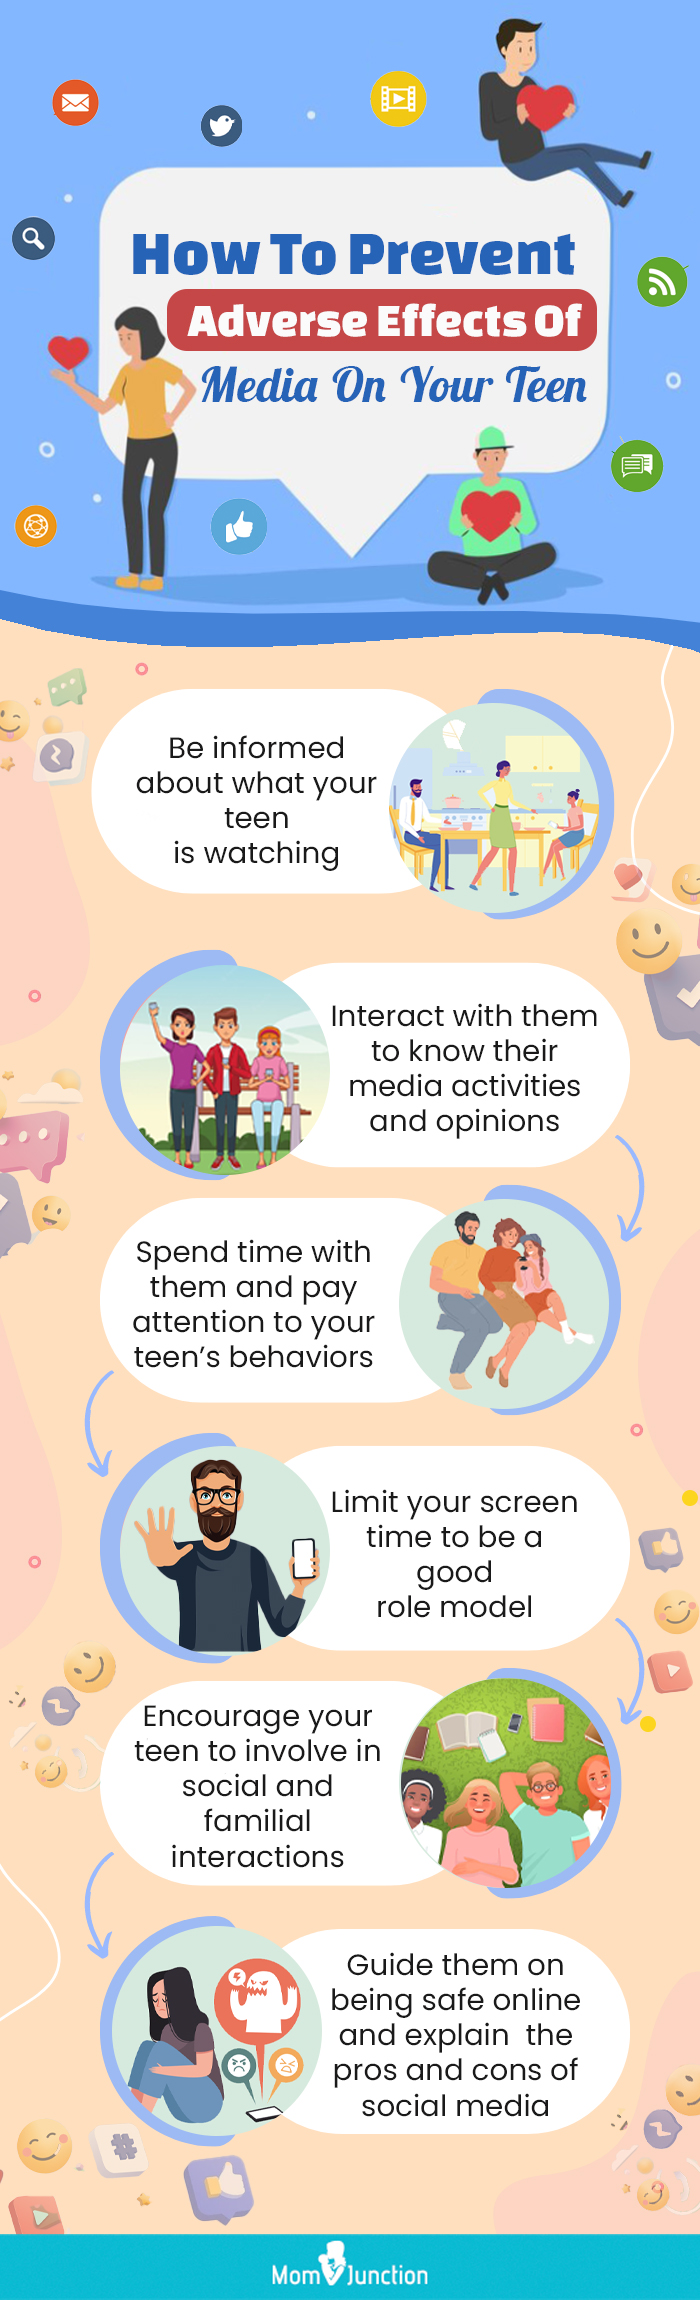 how to prevent adverse effects of media on your teen (infographic)